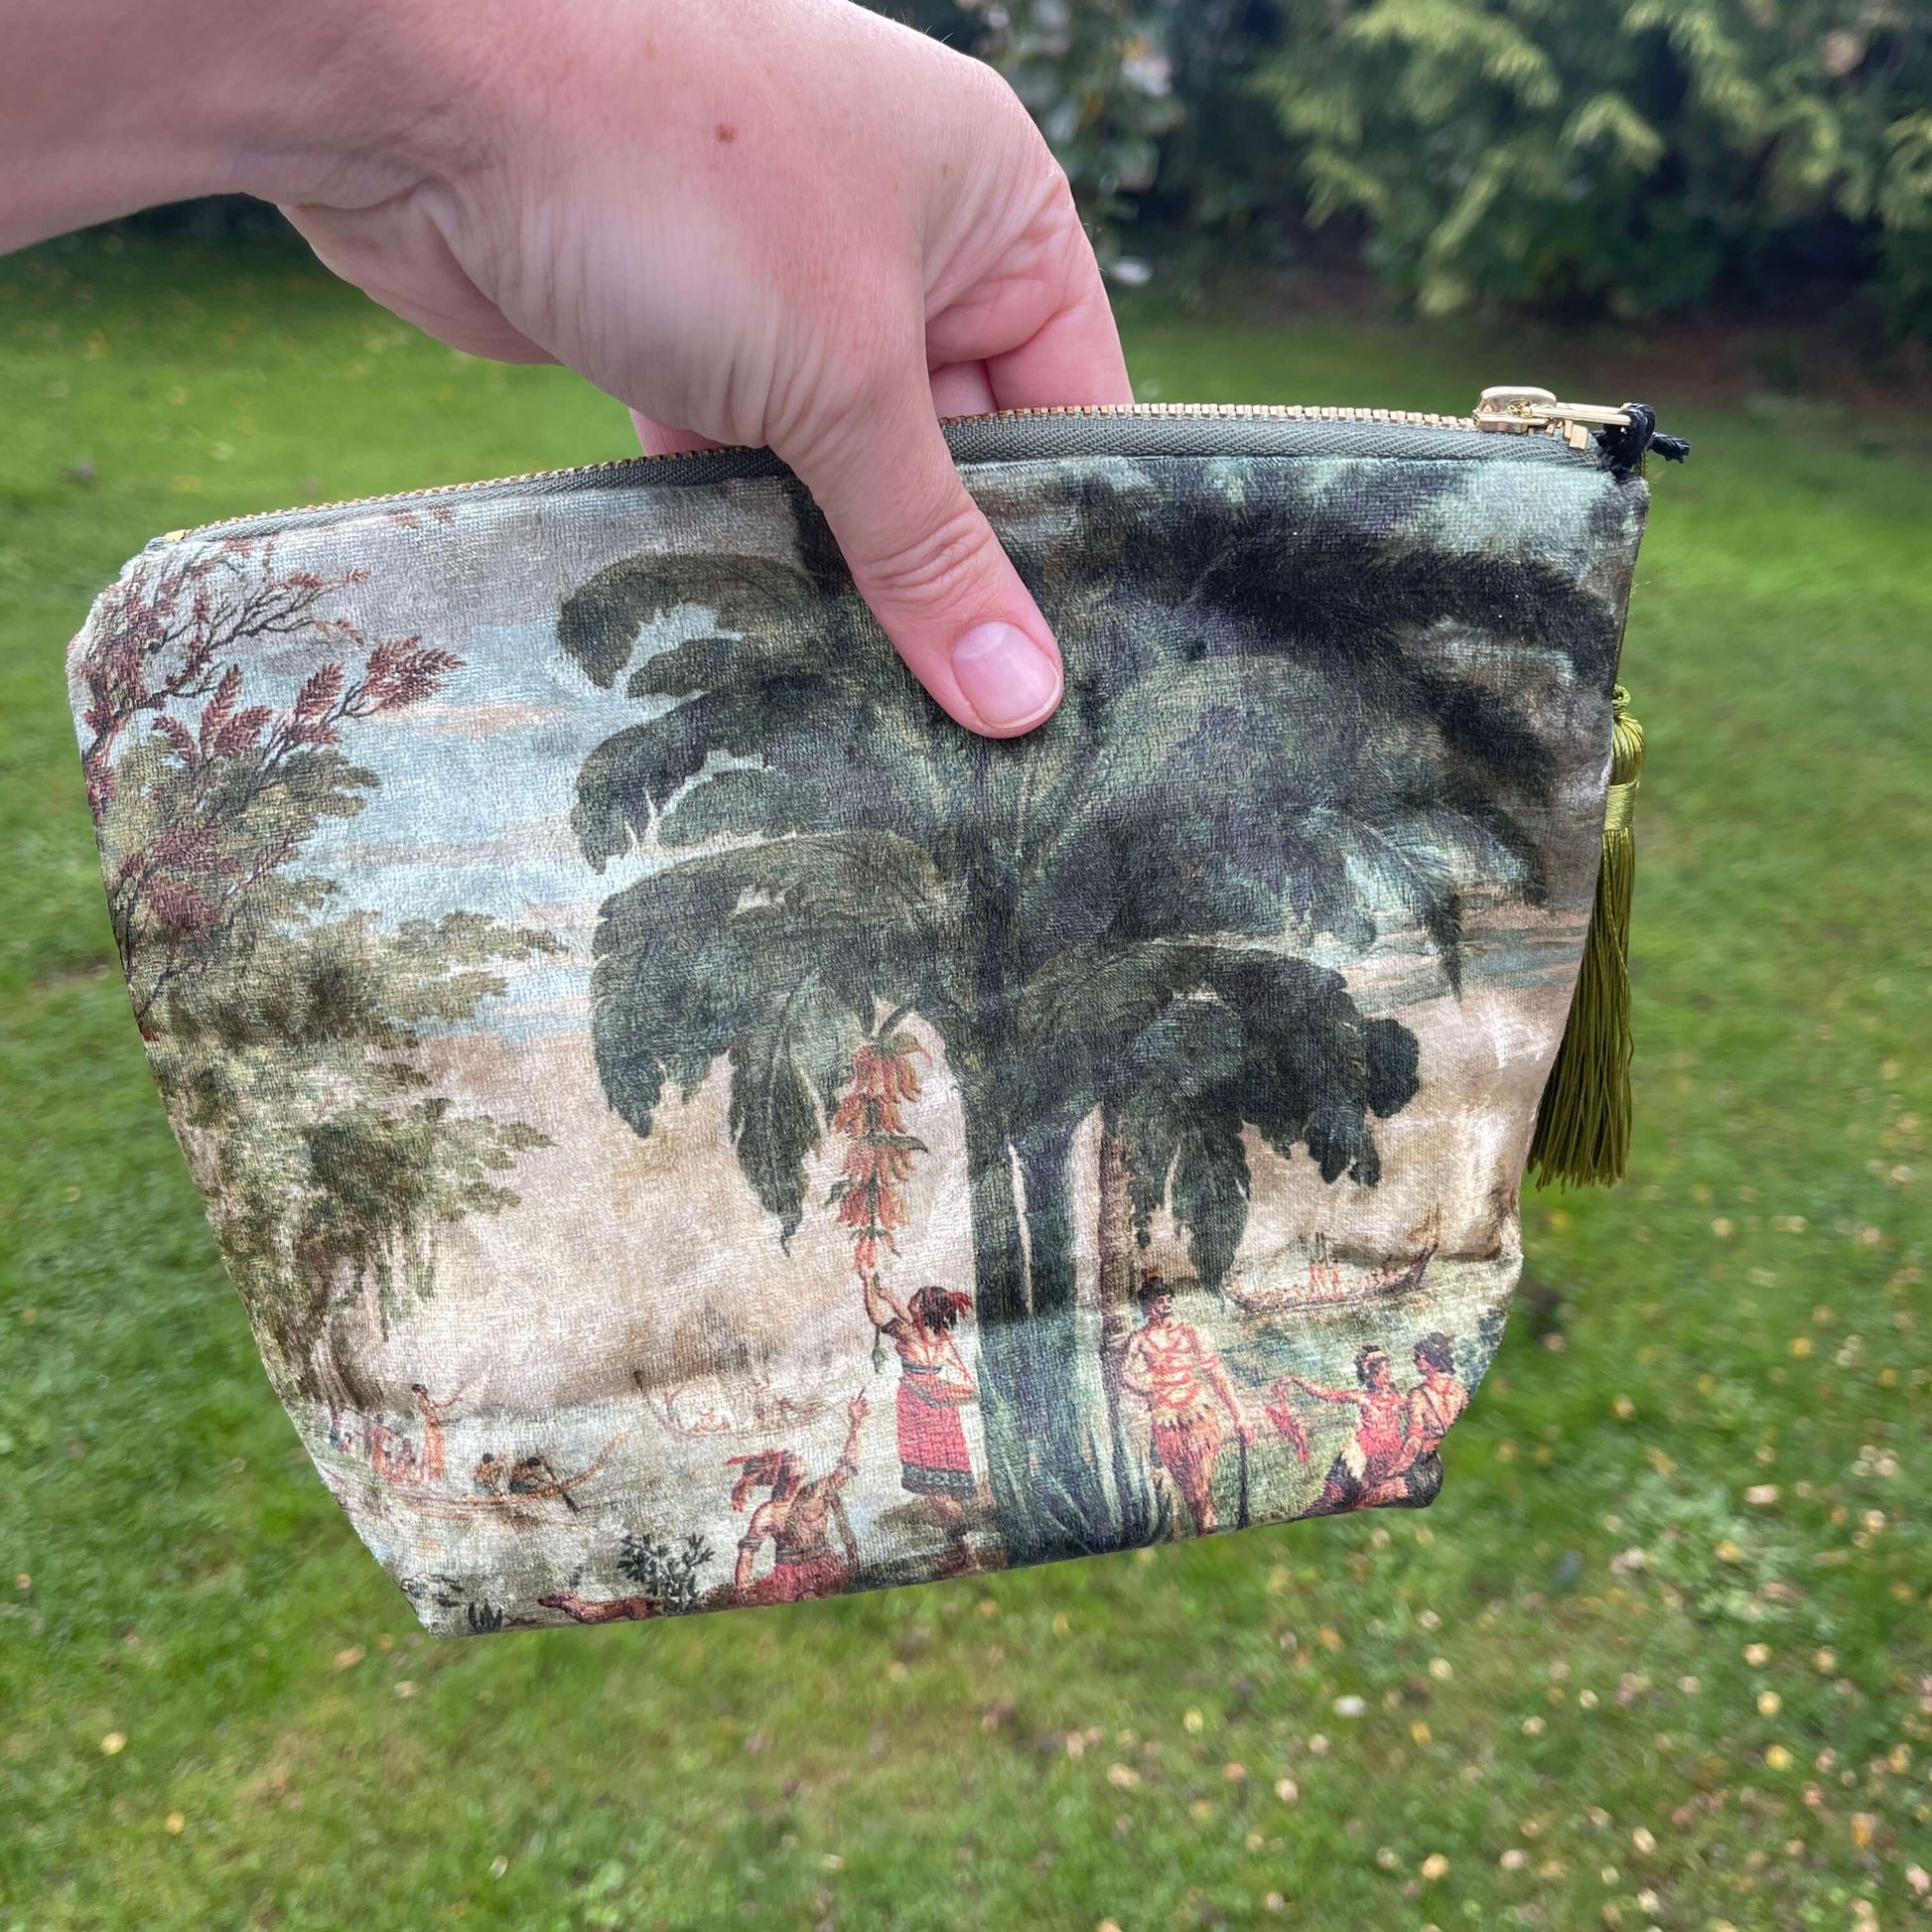 Persons hand holding a velvet cosmetic bag featuring a scene from a Joseph Dufour painting.